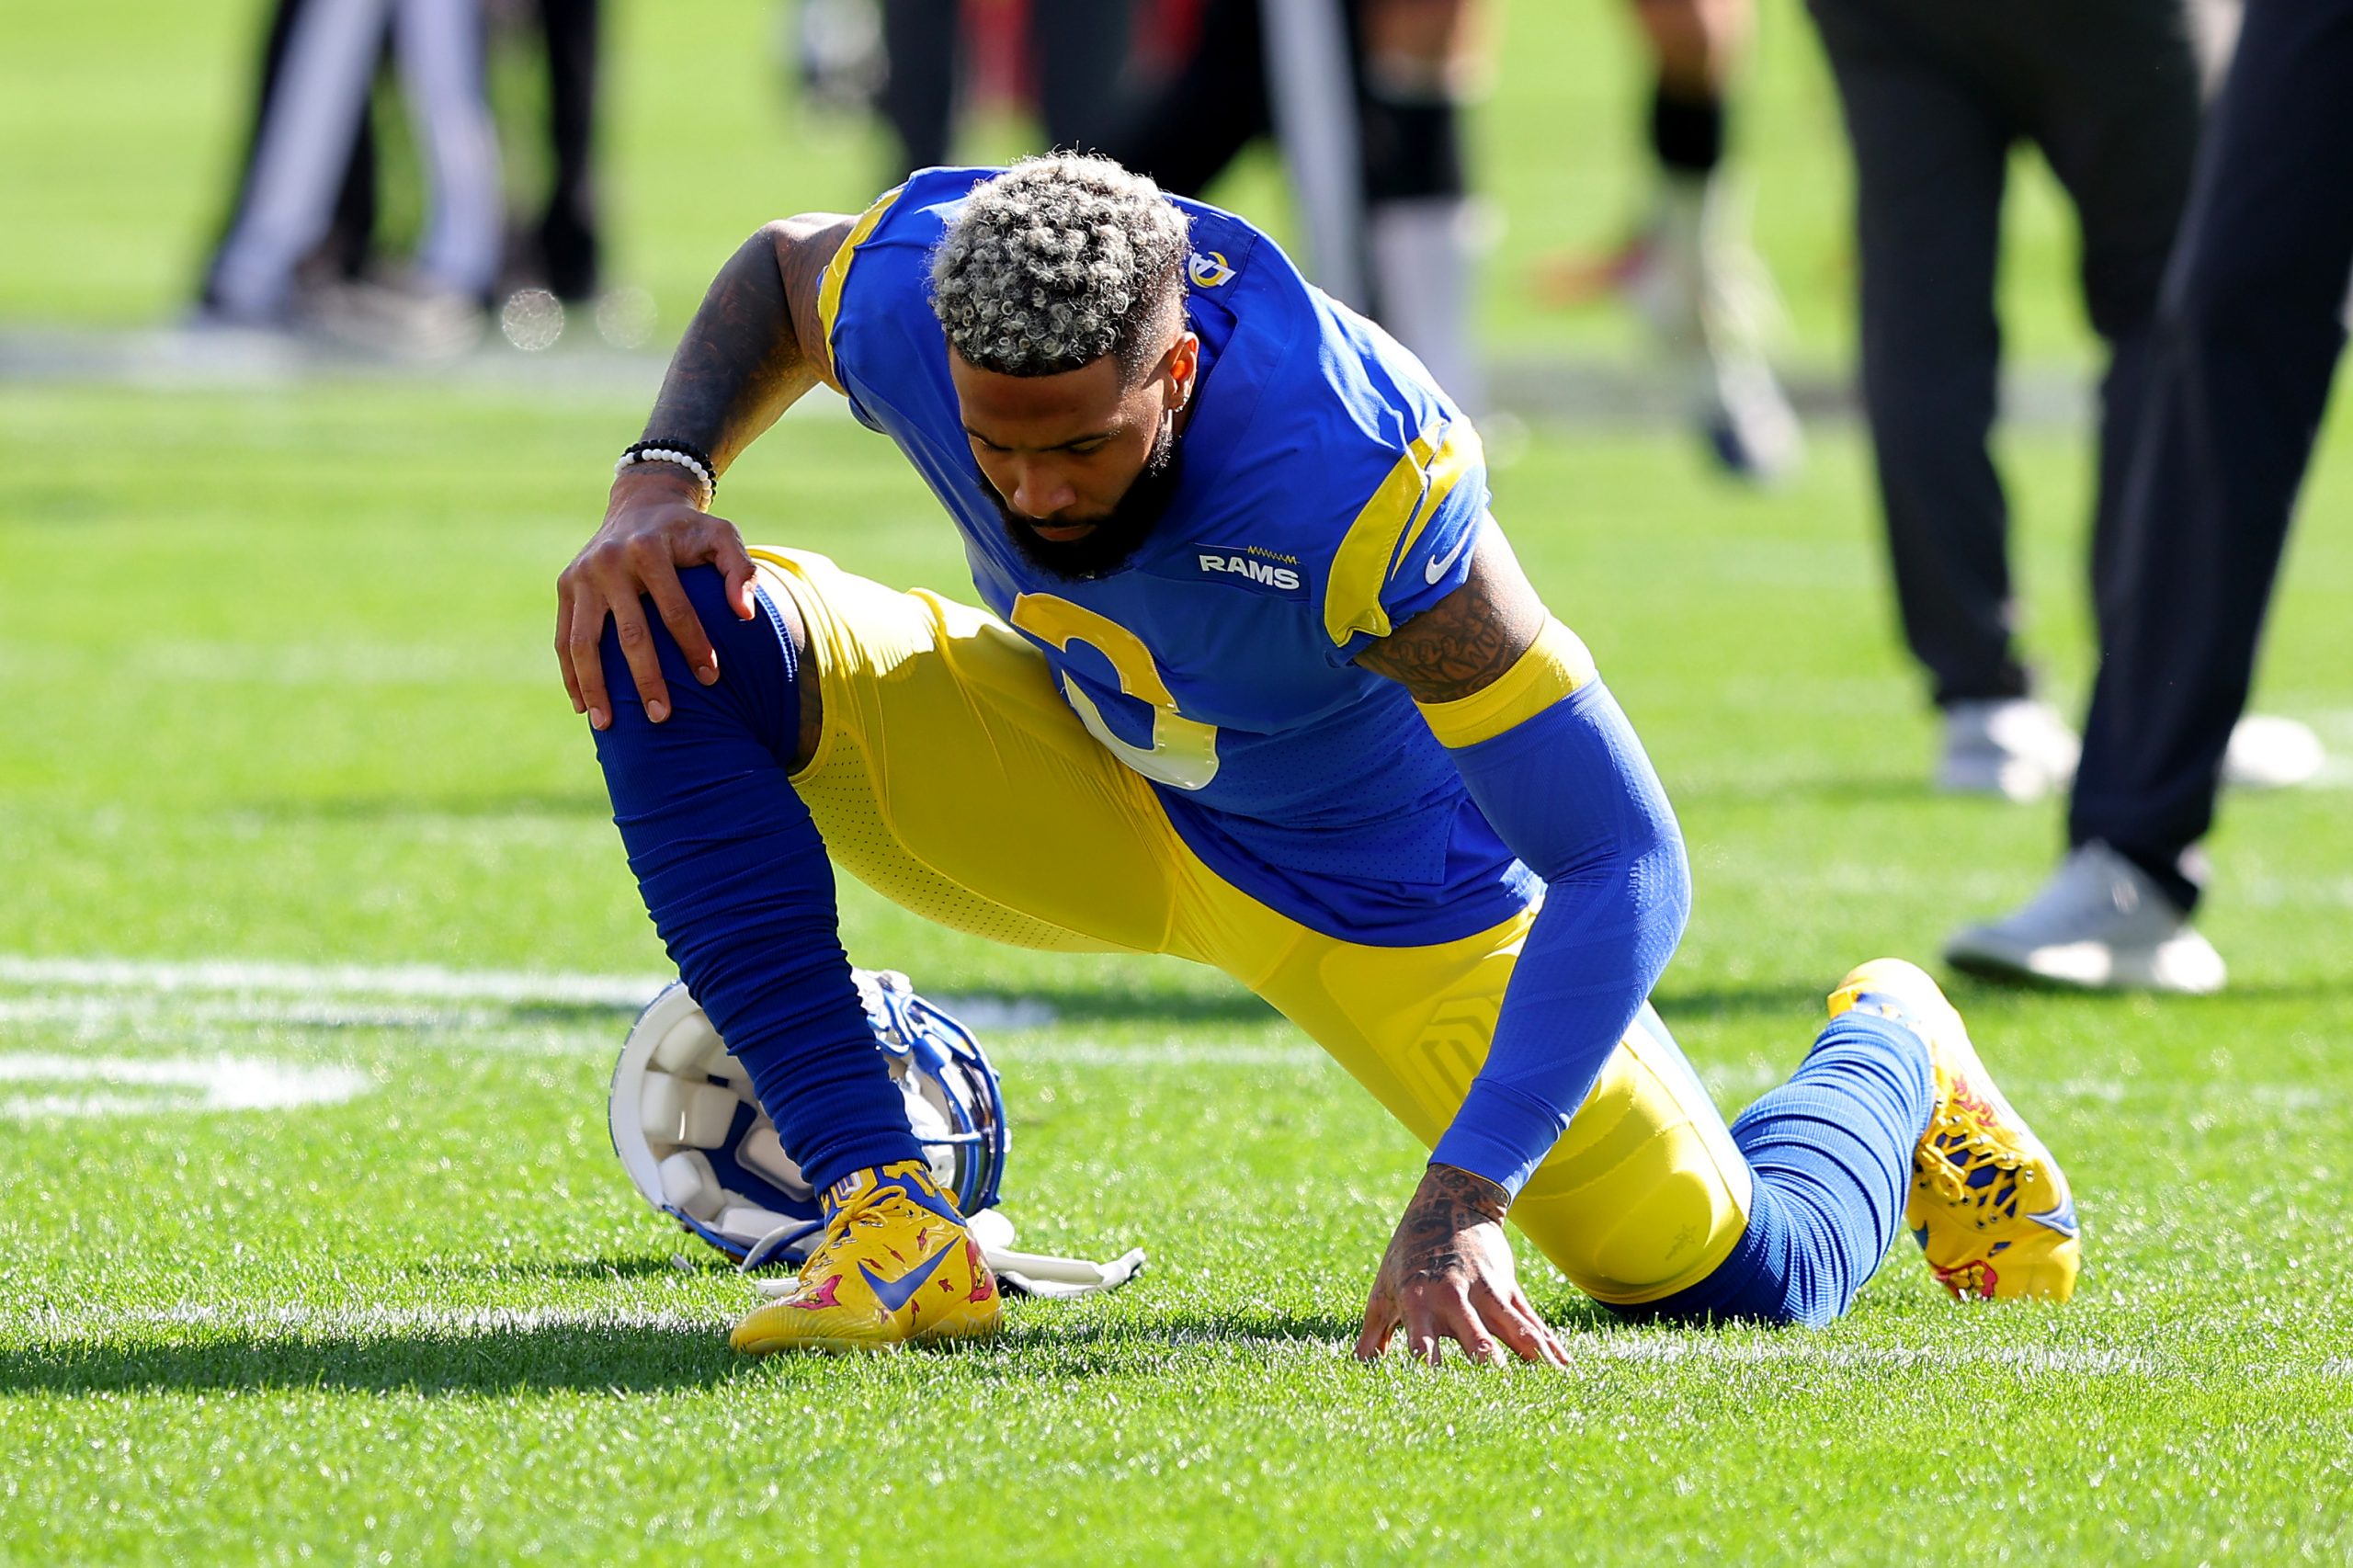 Odell Beckham Jr. of the Los Angeles Rams stretches prior to facing the Tampa Bay Buccaneers in the NFC Divisional Playoff game.